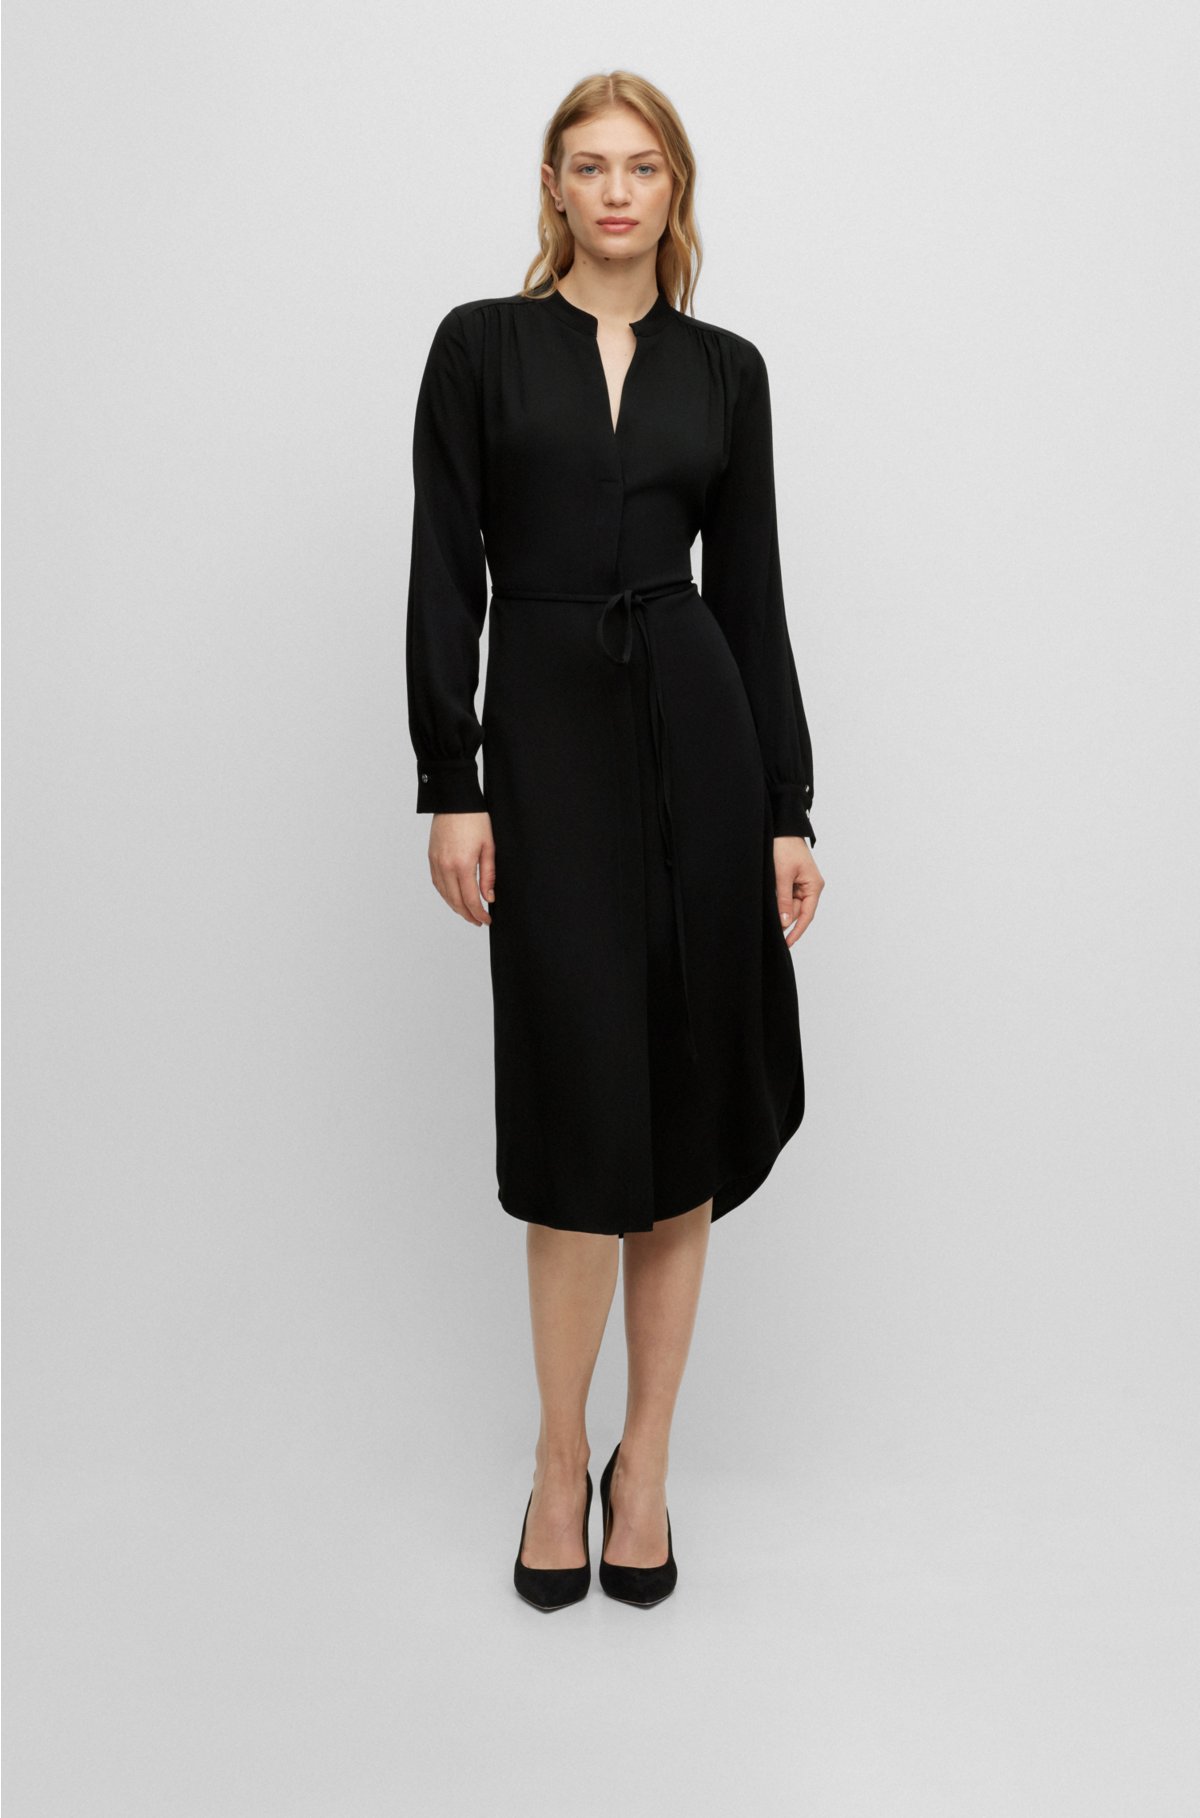 Belted dress with collarless V neckline and button cuffs